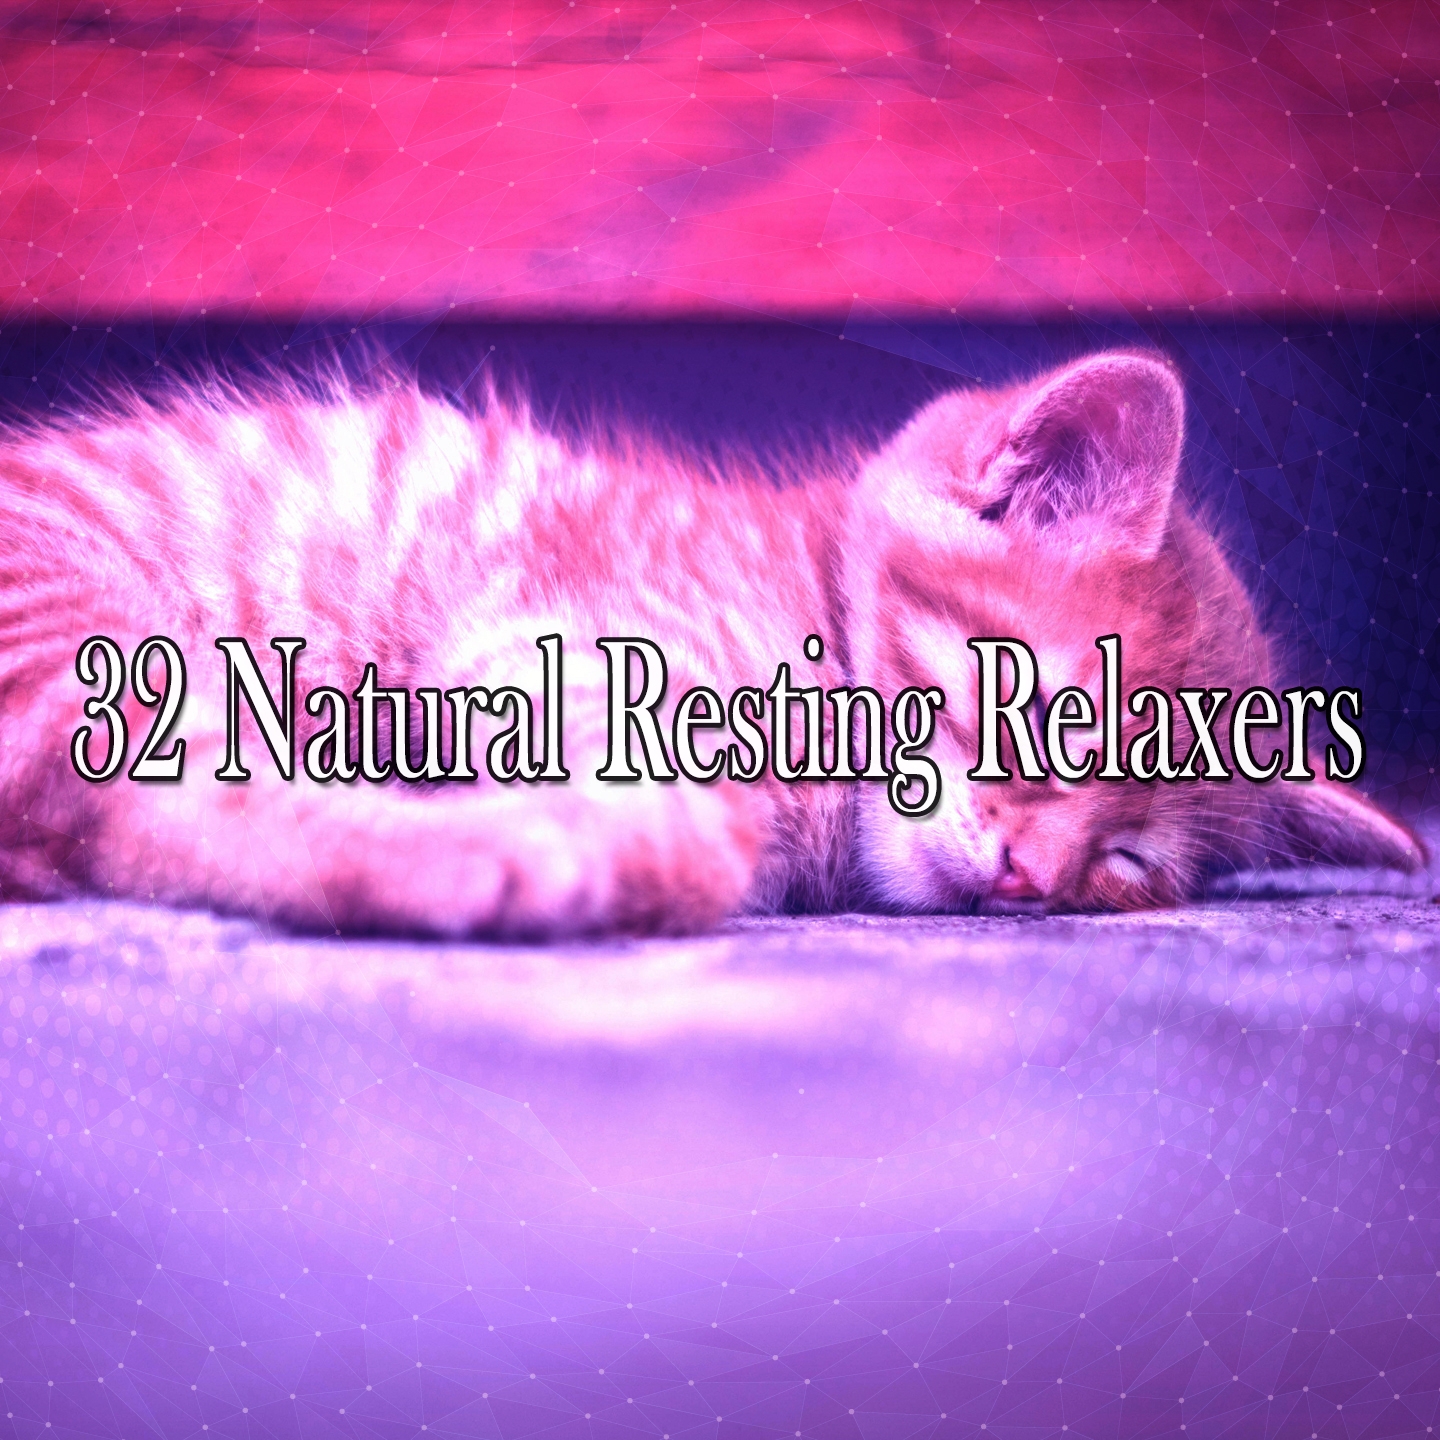 32 Natural Resting Relaxers